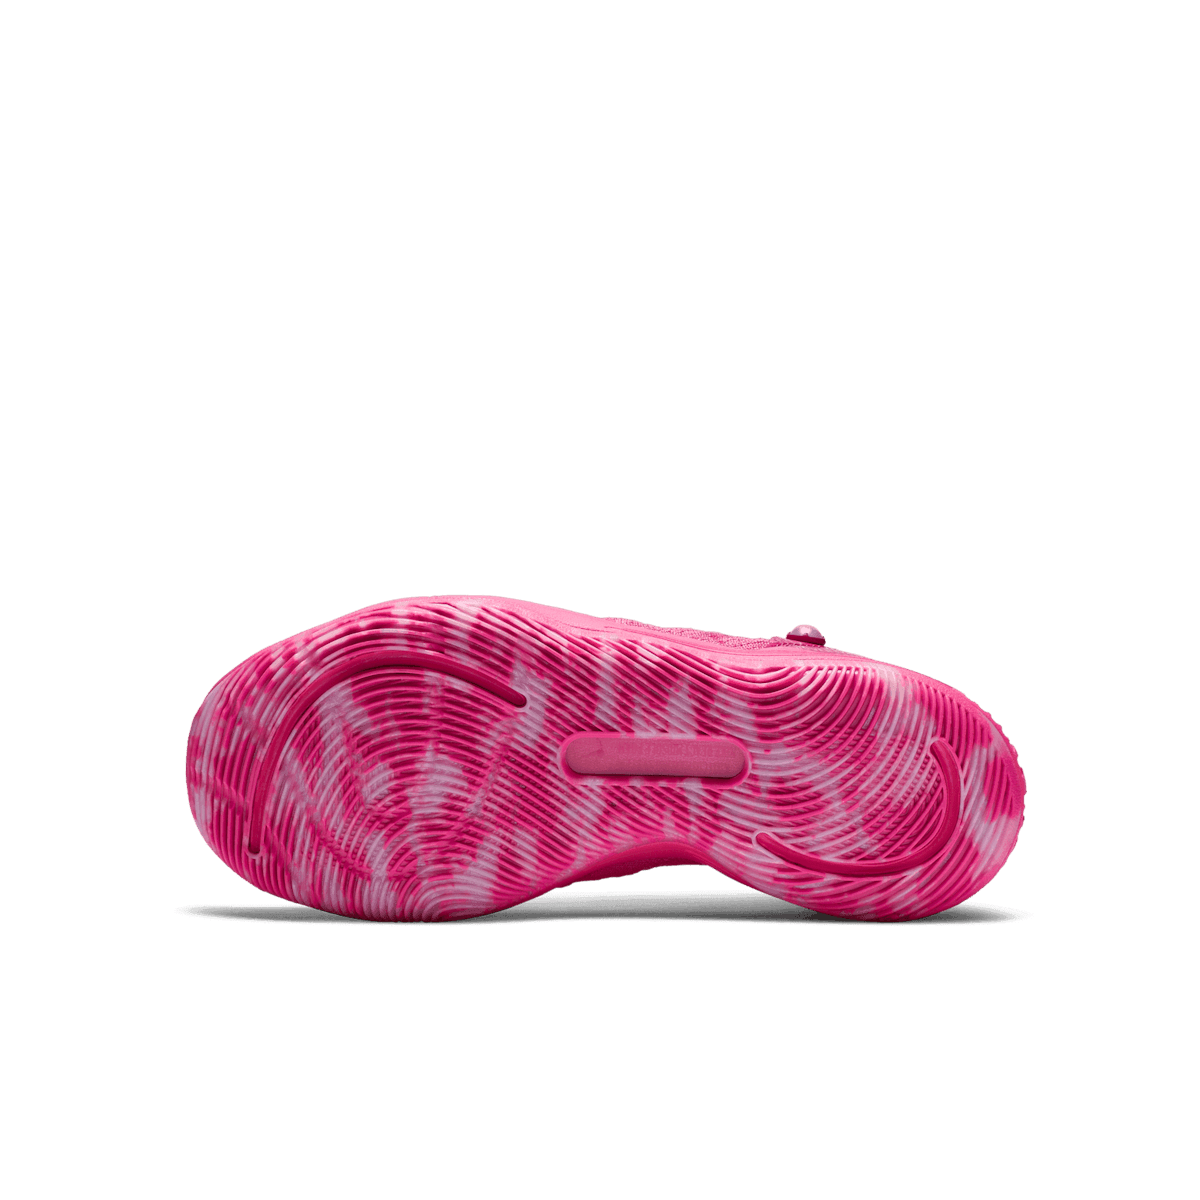 Nike KD 11 Aunt Pearl (GS) Angle 0